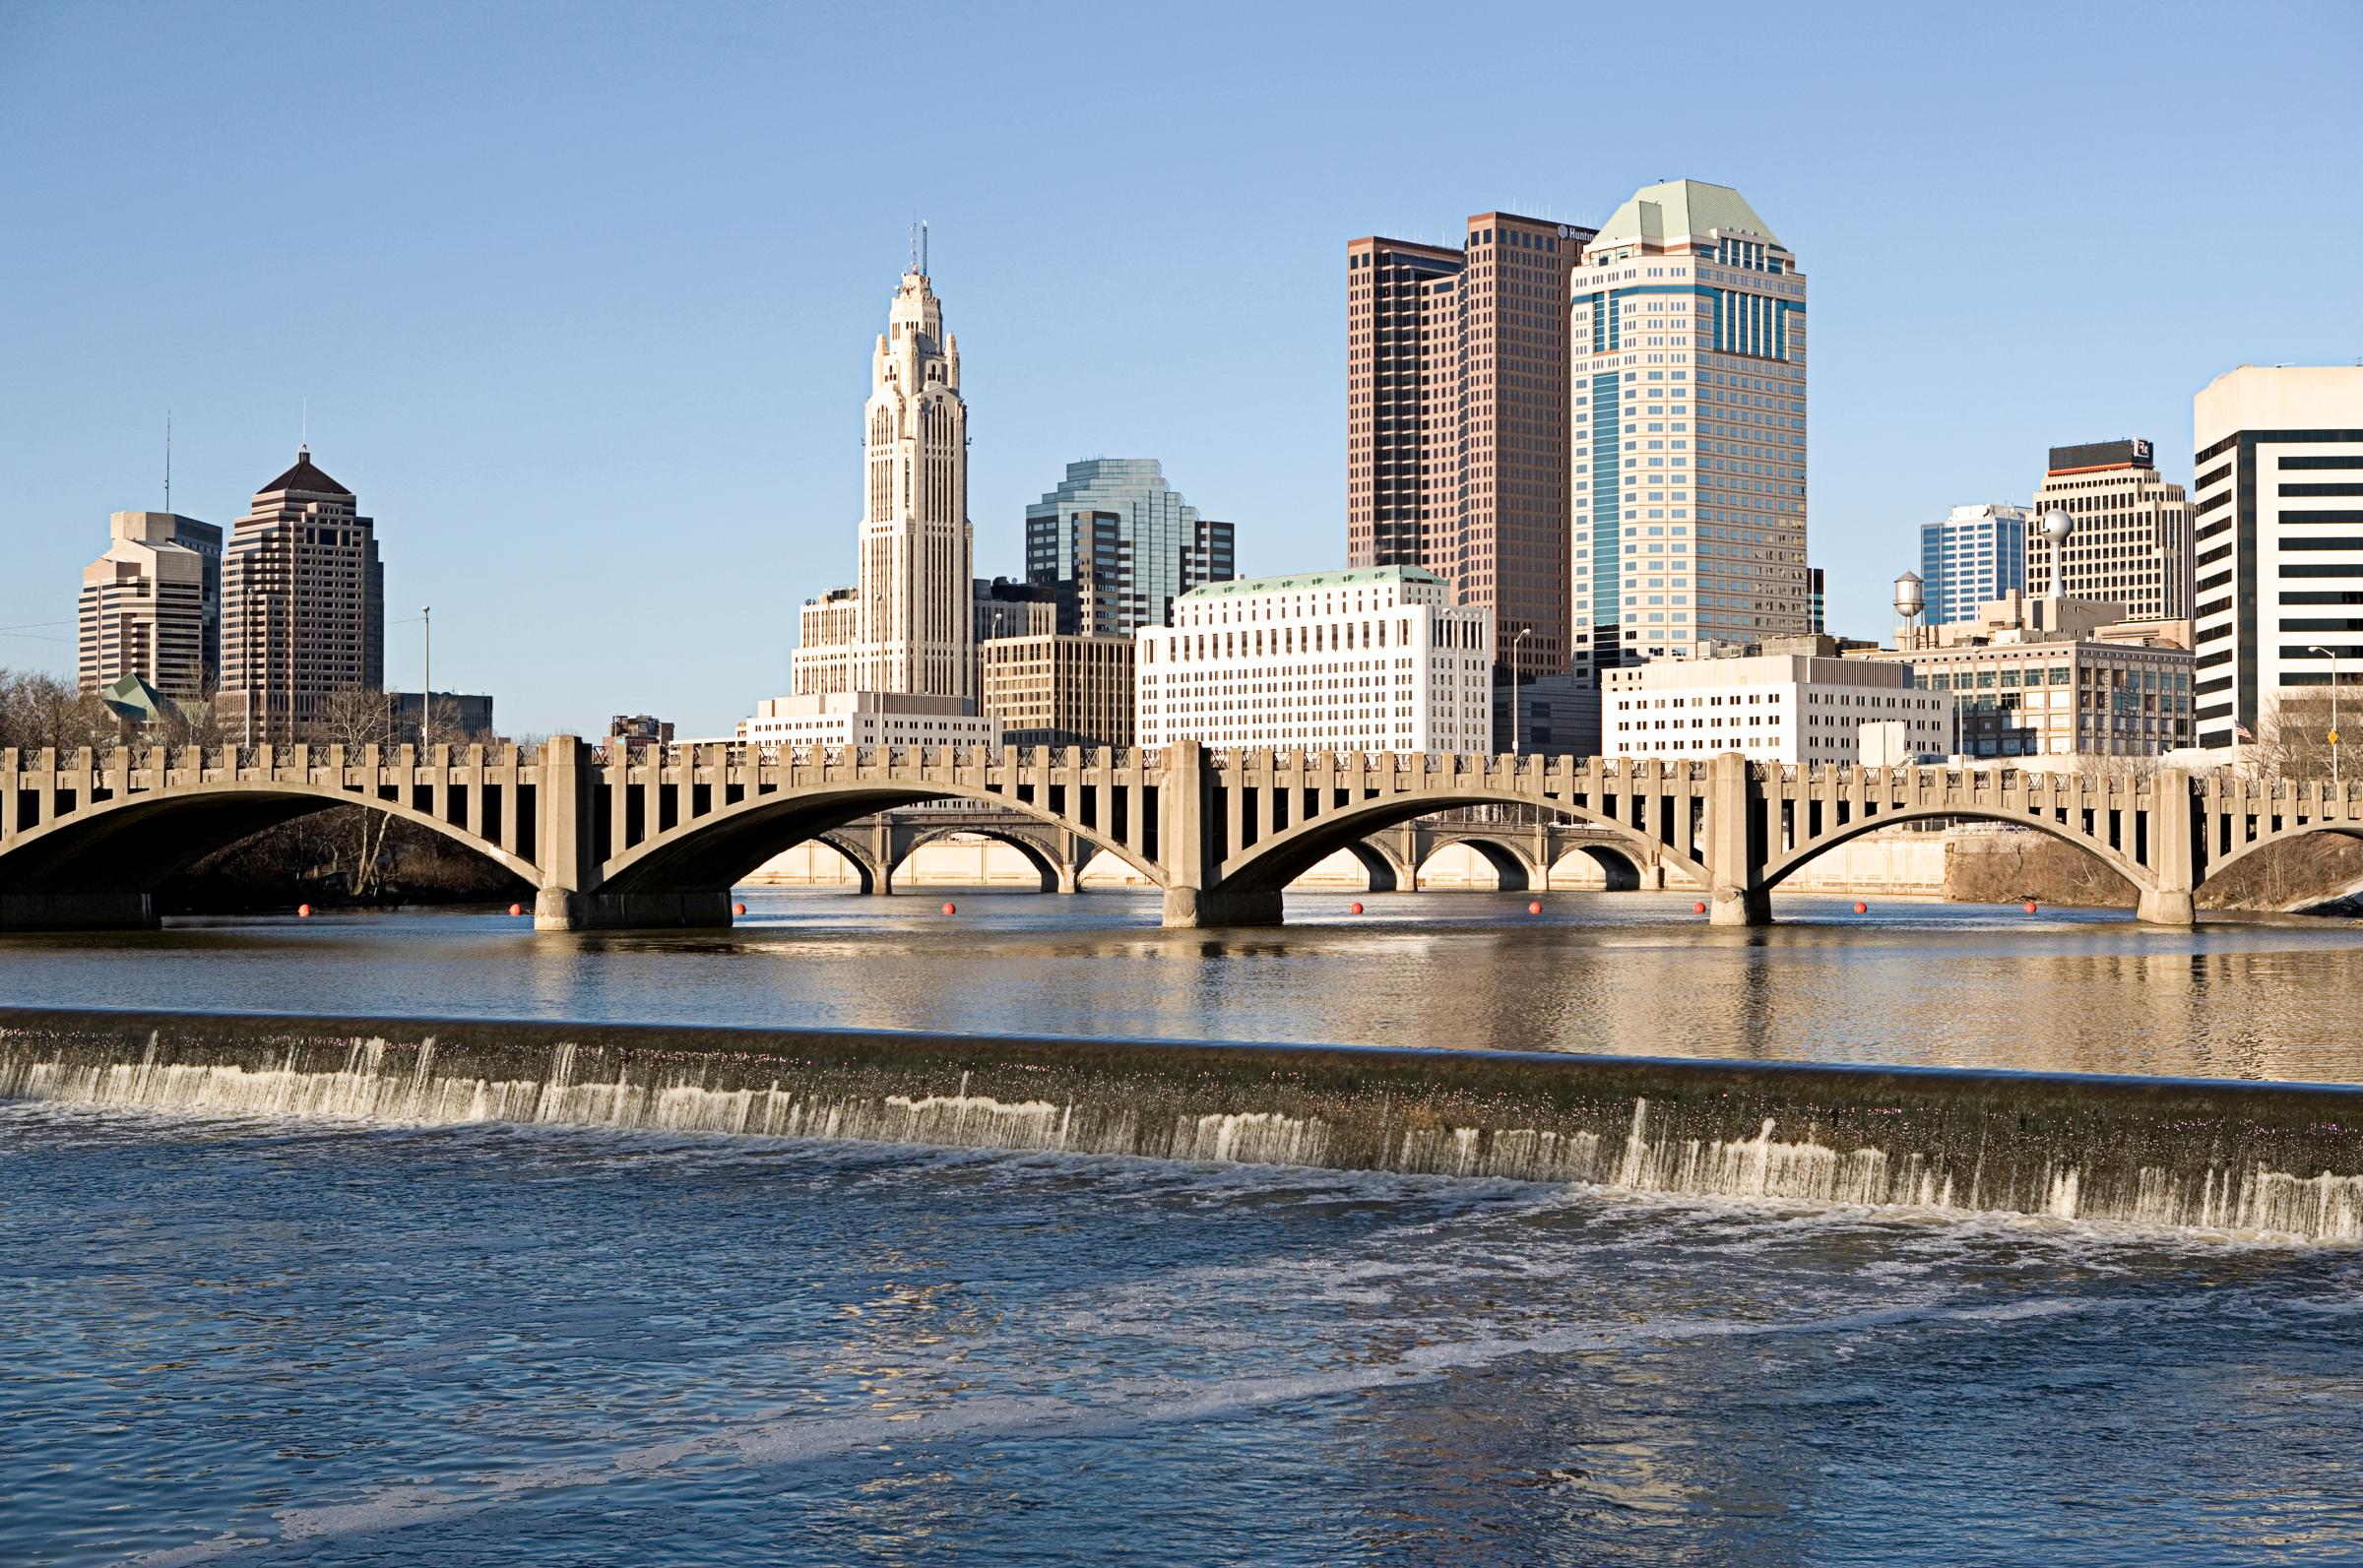 Scioto river with waterfall and Columbus Ohio skyline, USA